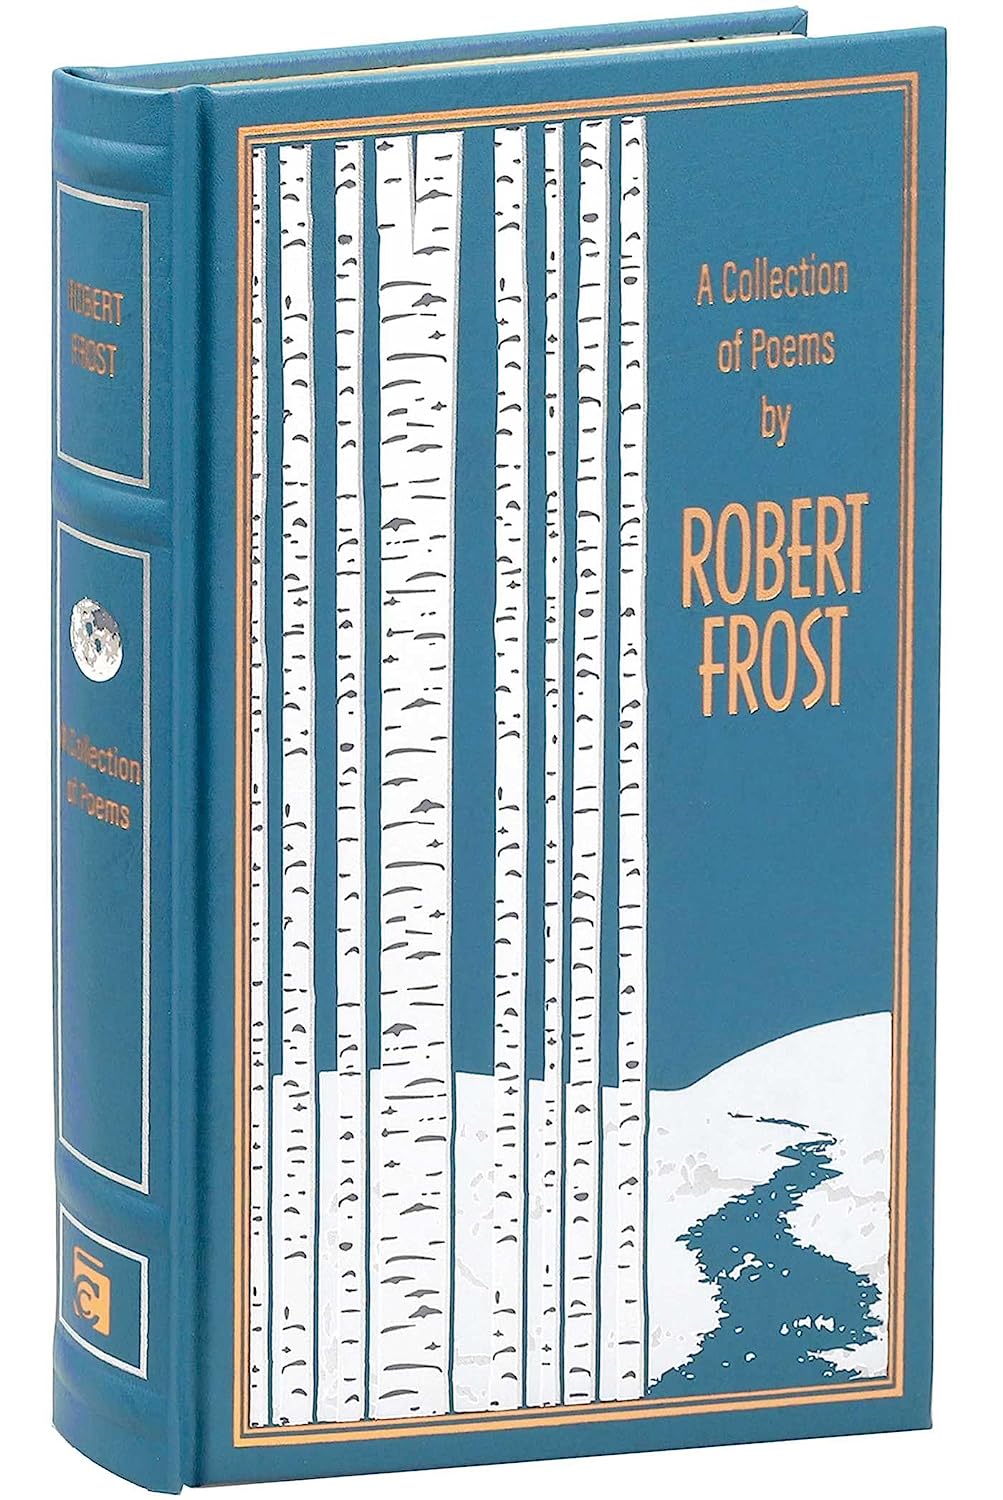 Artbook - Sách Tiếng Anh - A Collection of Poems by Robert Frost (Leather-bound Classics)